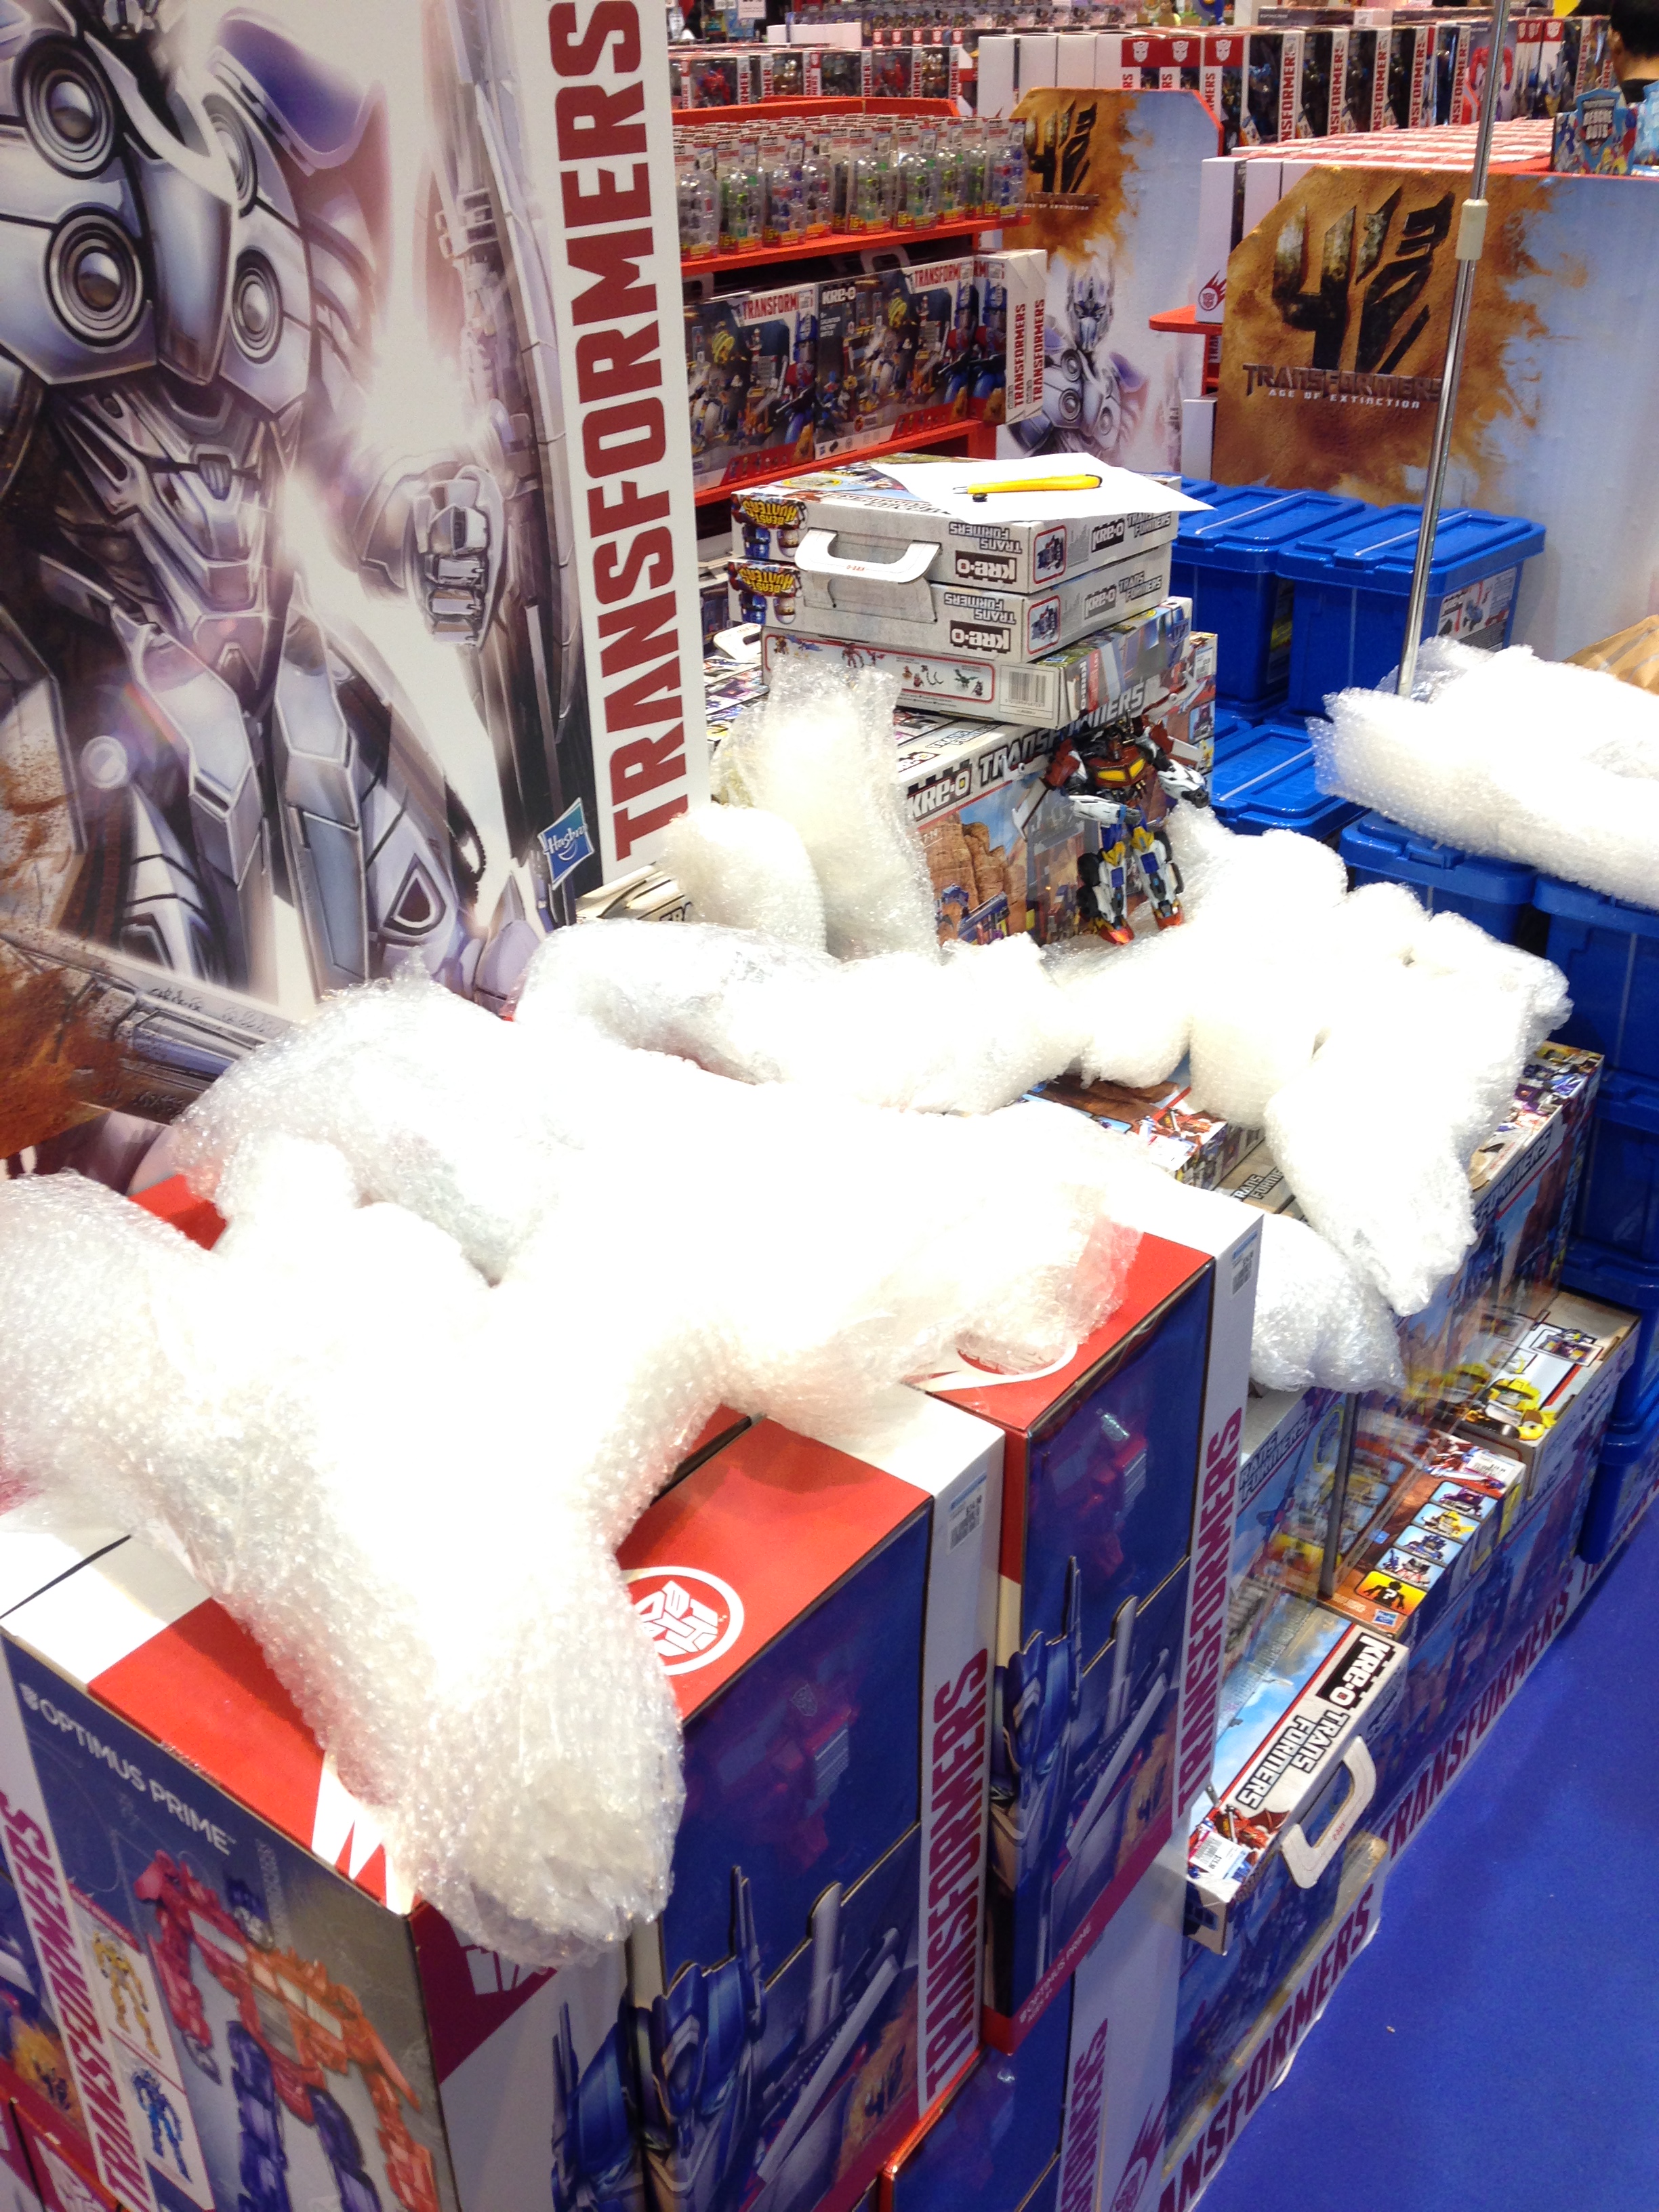 VIctory Saber and the bubble wrapped Transformers.